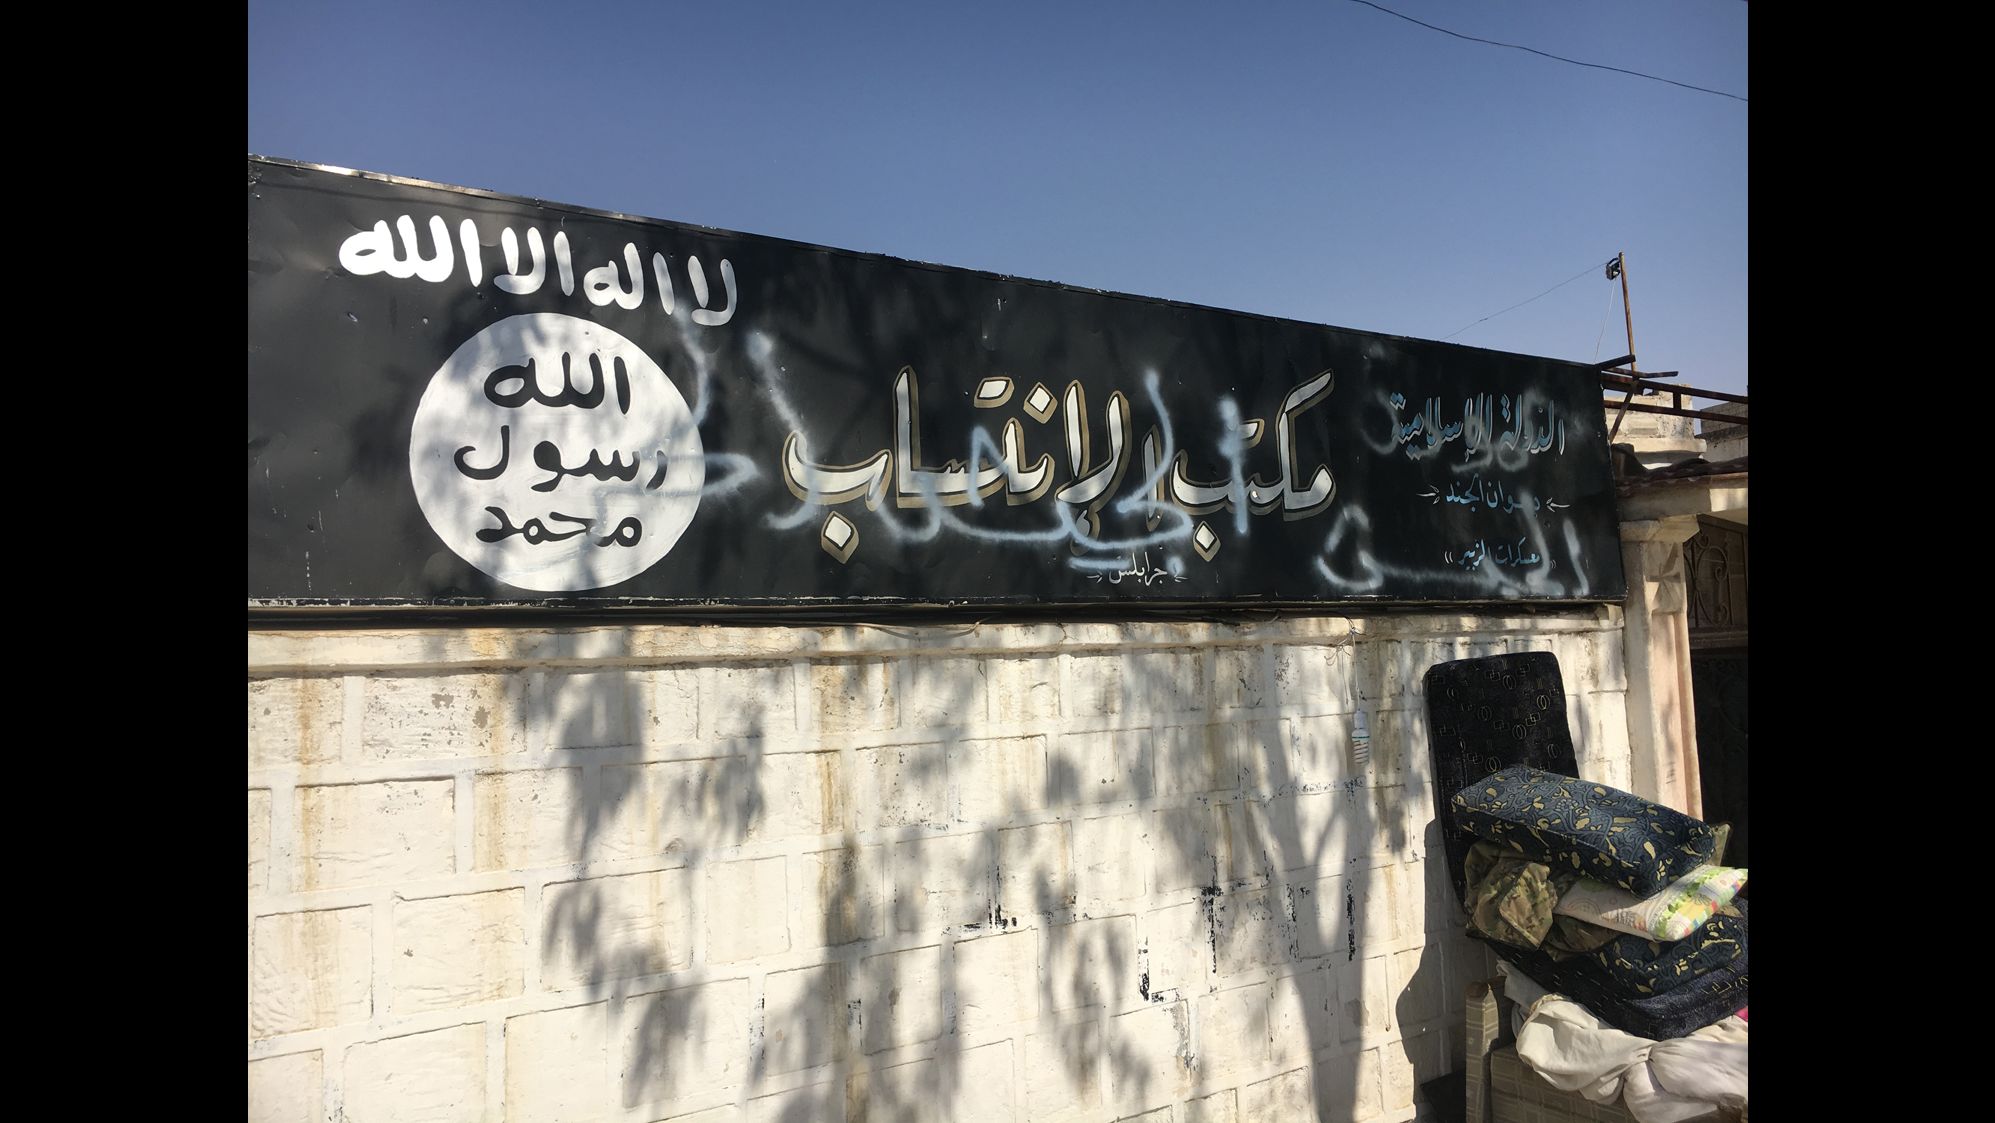 The sign in front of the ISIS recruitment center in Jarablus now has the words "Free Syrian Army" sprayed over it.